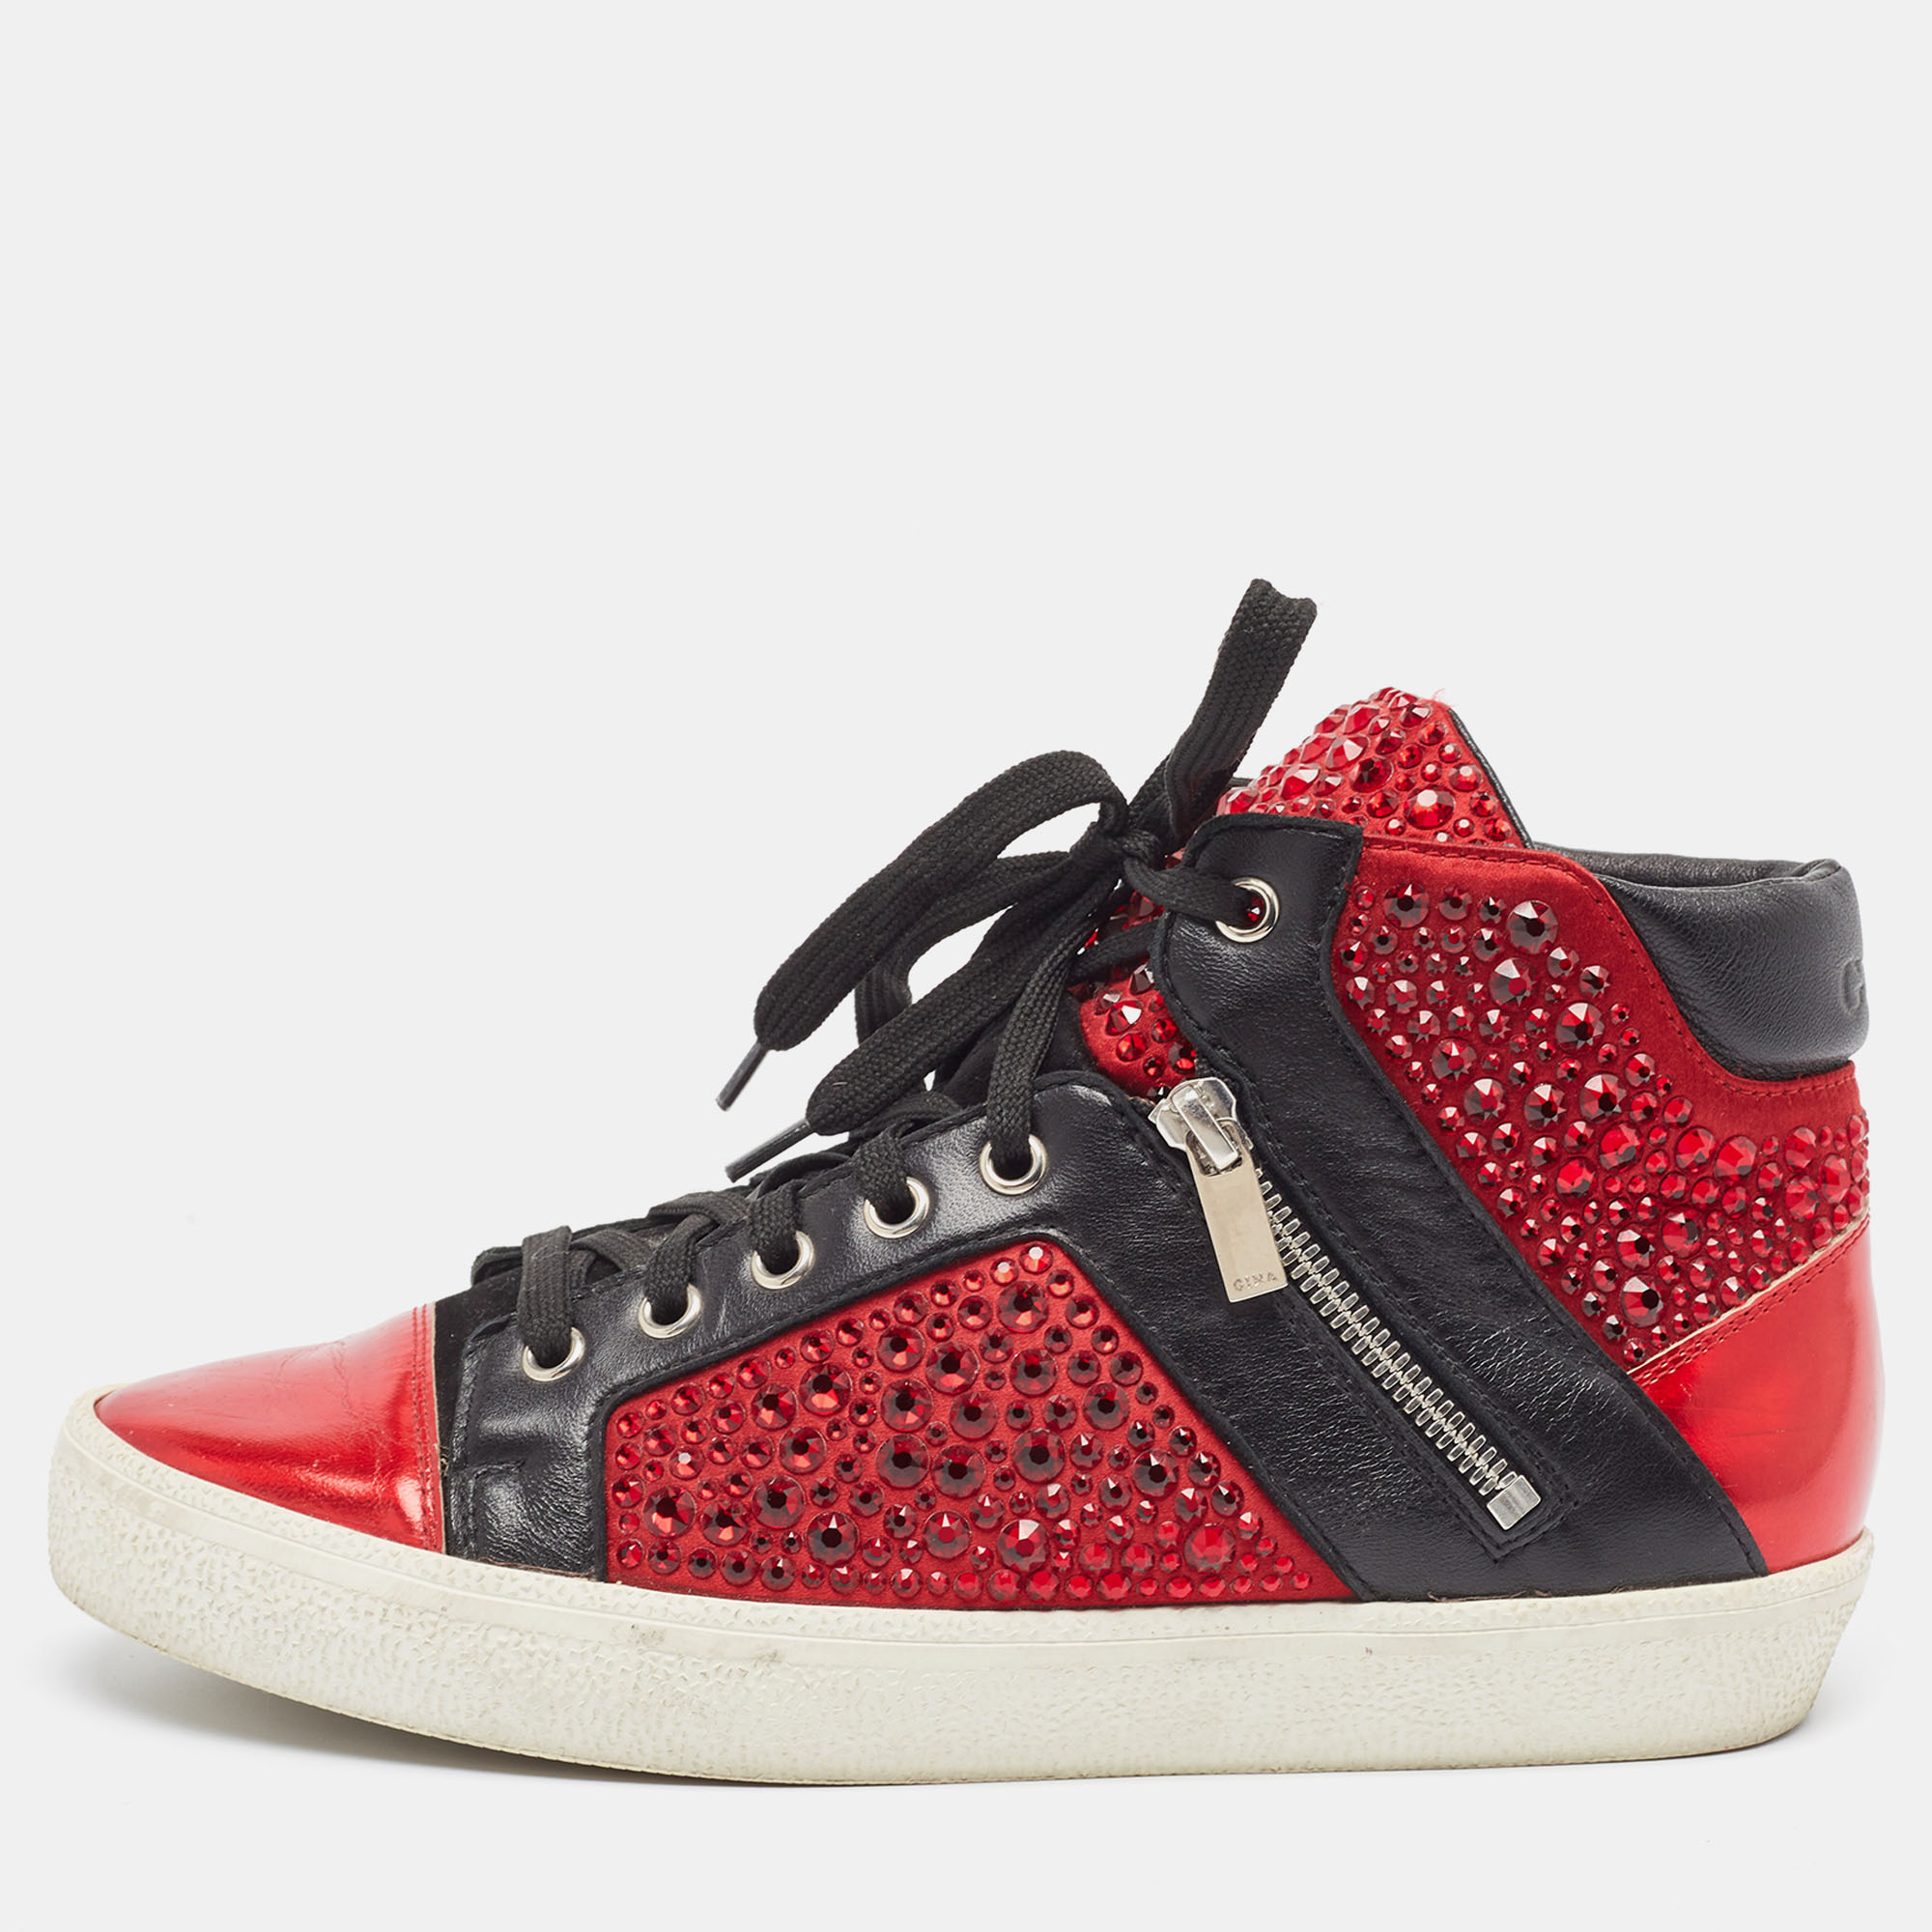 Gina red/black leather crystal embellished high top sneakers size 39